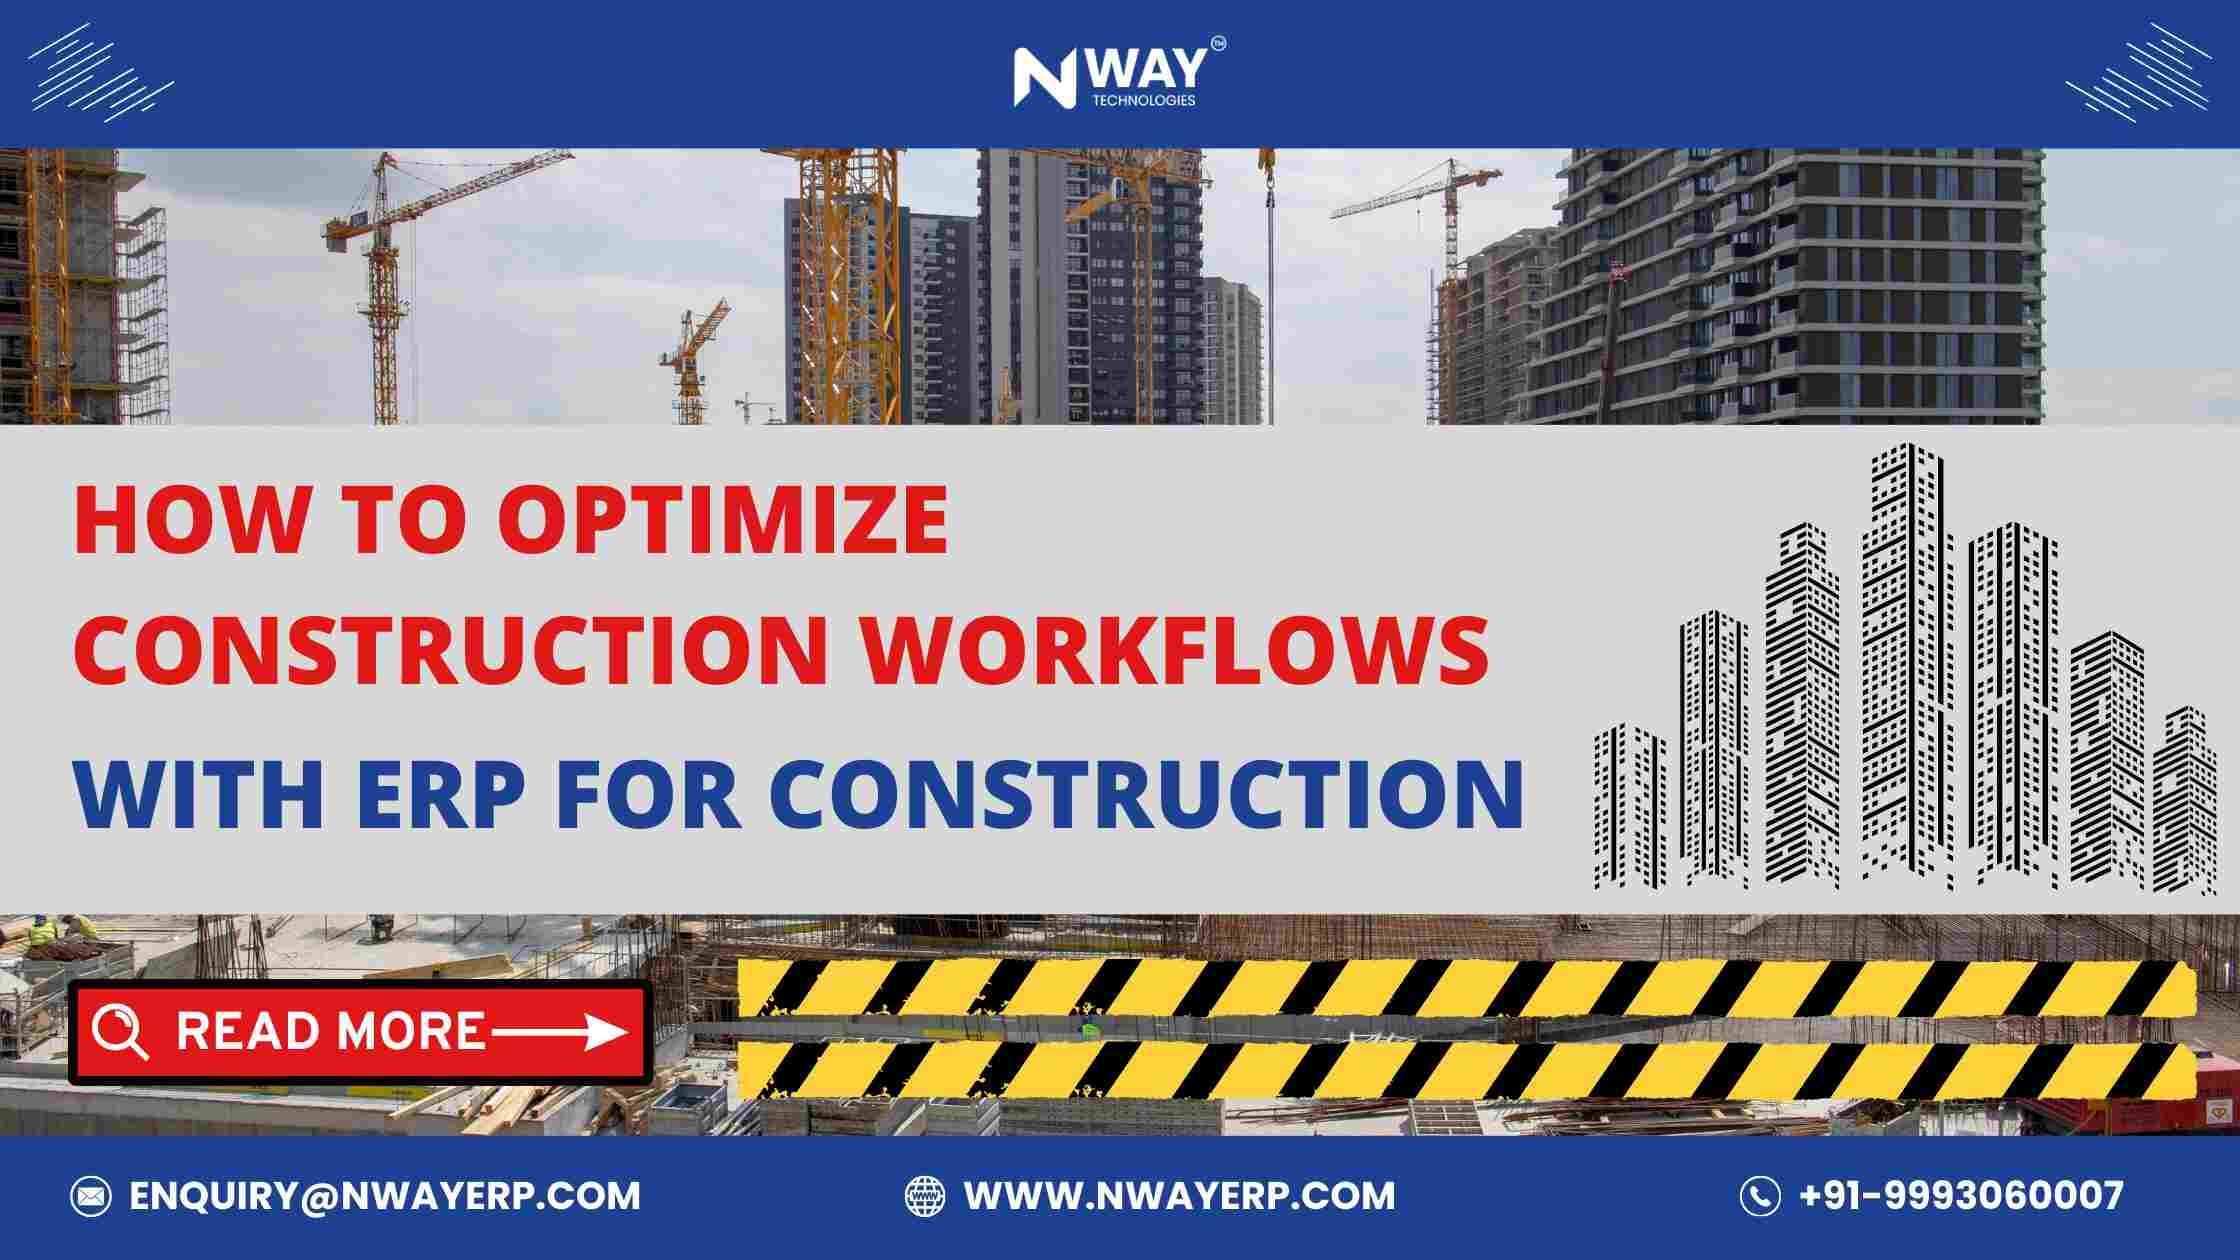 How to Optimize Construction Workflows with ERP for Construction